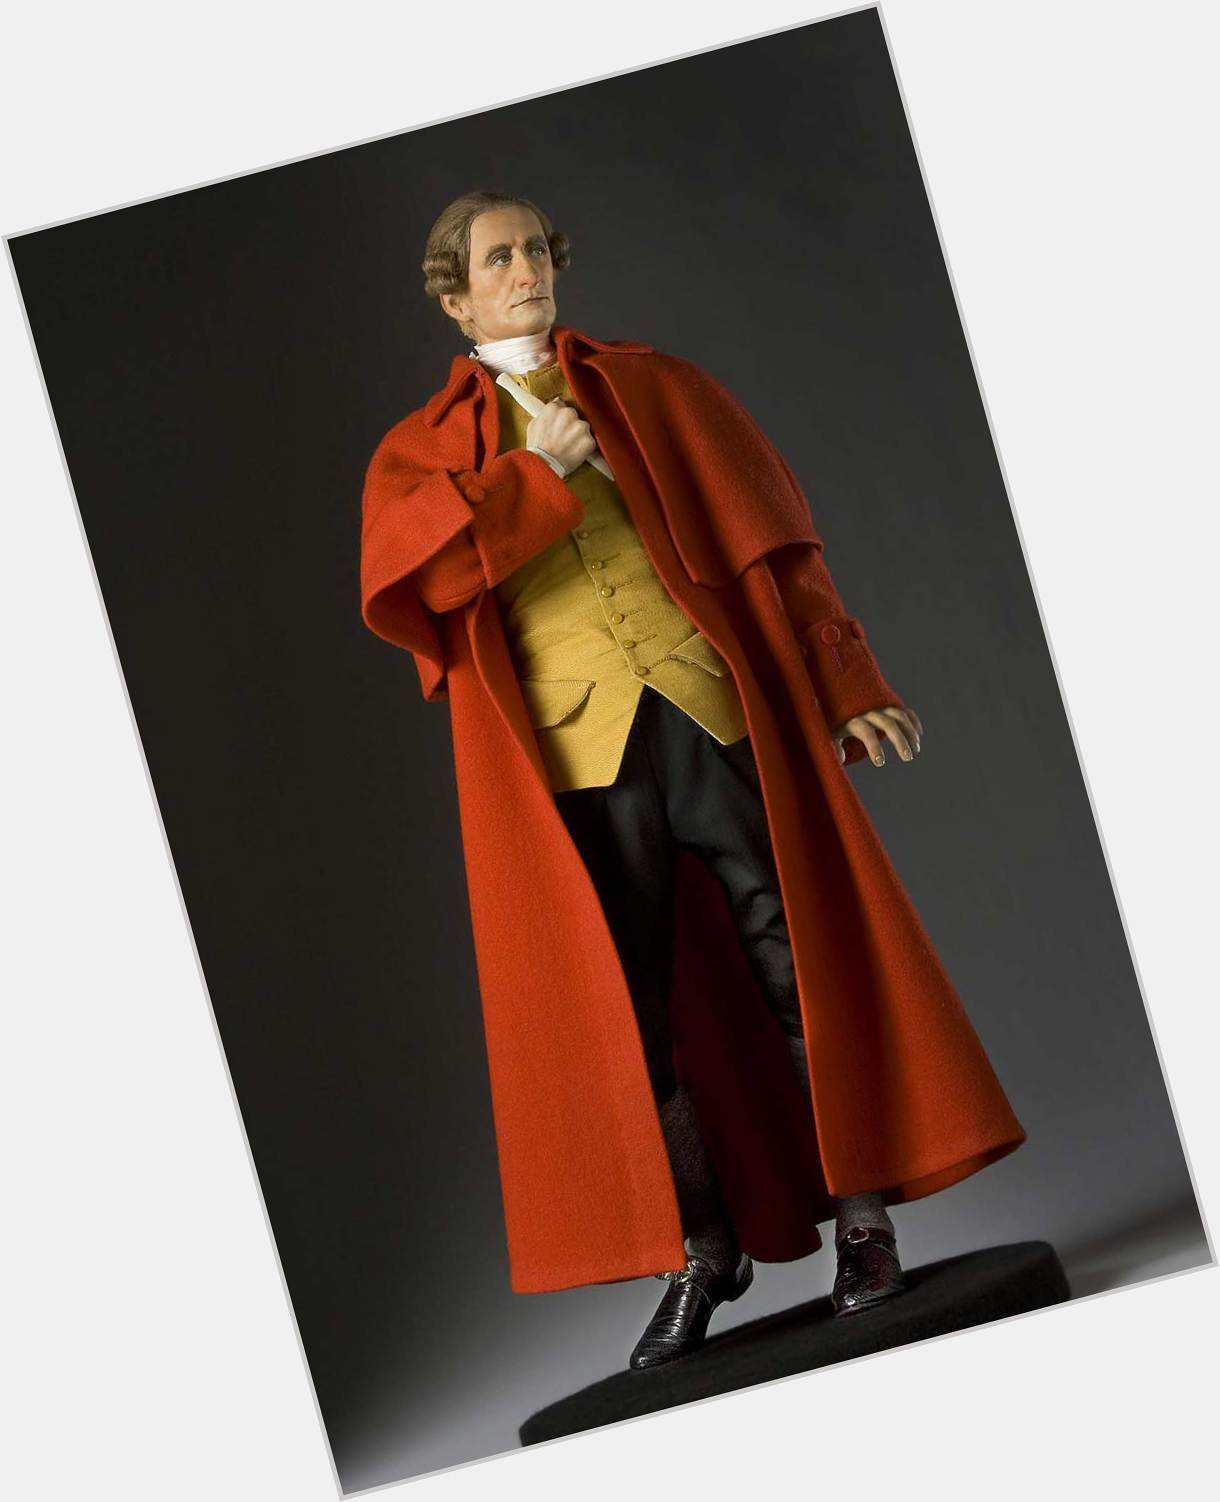 <a href="/hot-men/patrick-henry/is-he-mall-open-today-village-still">Patrick Henry</a> Average body,  light brown hair & hairstyles